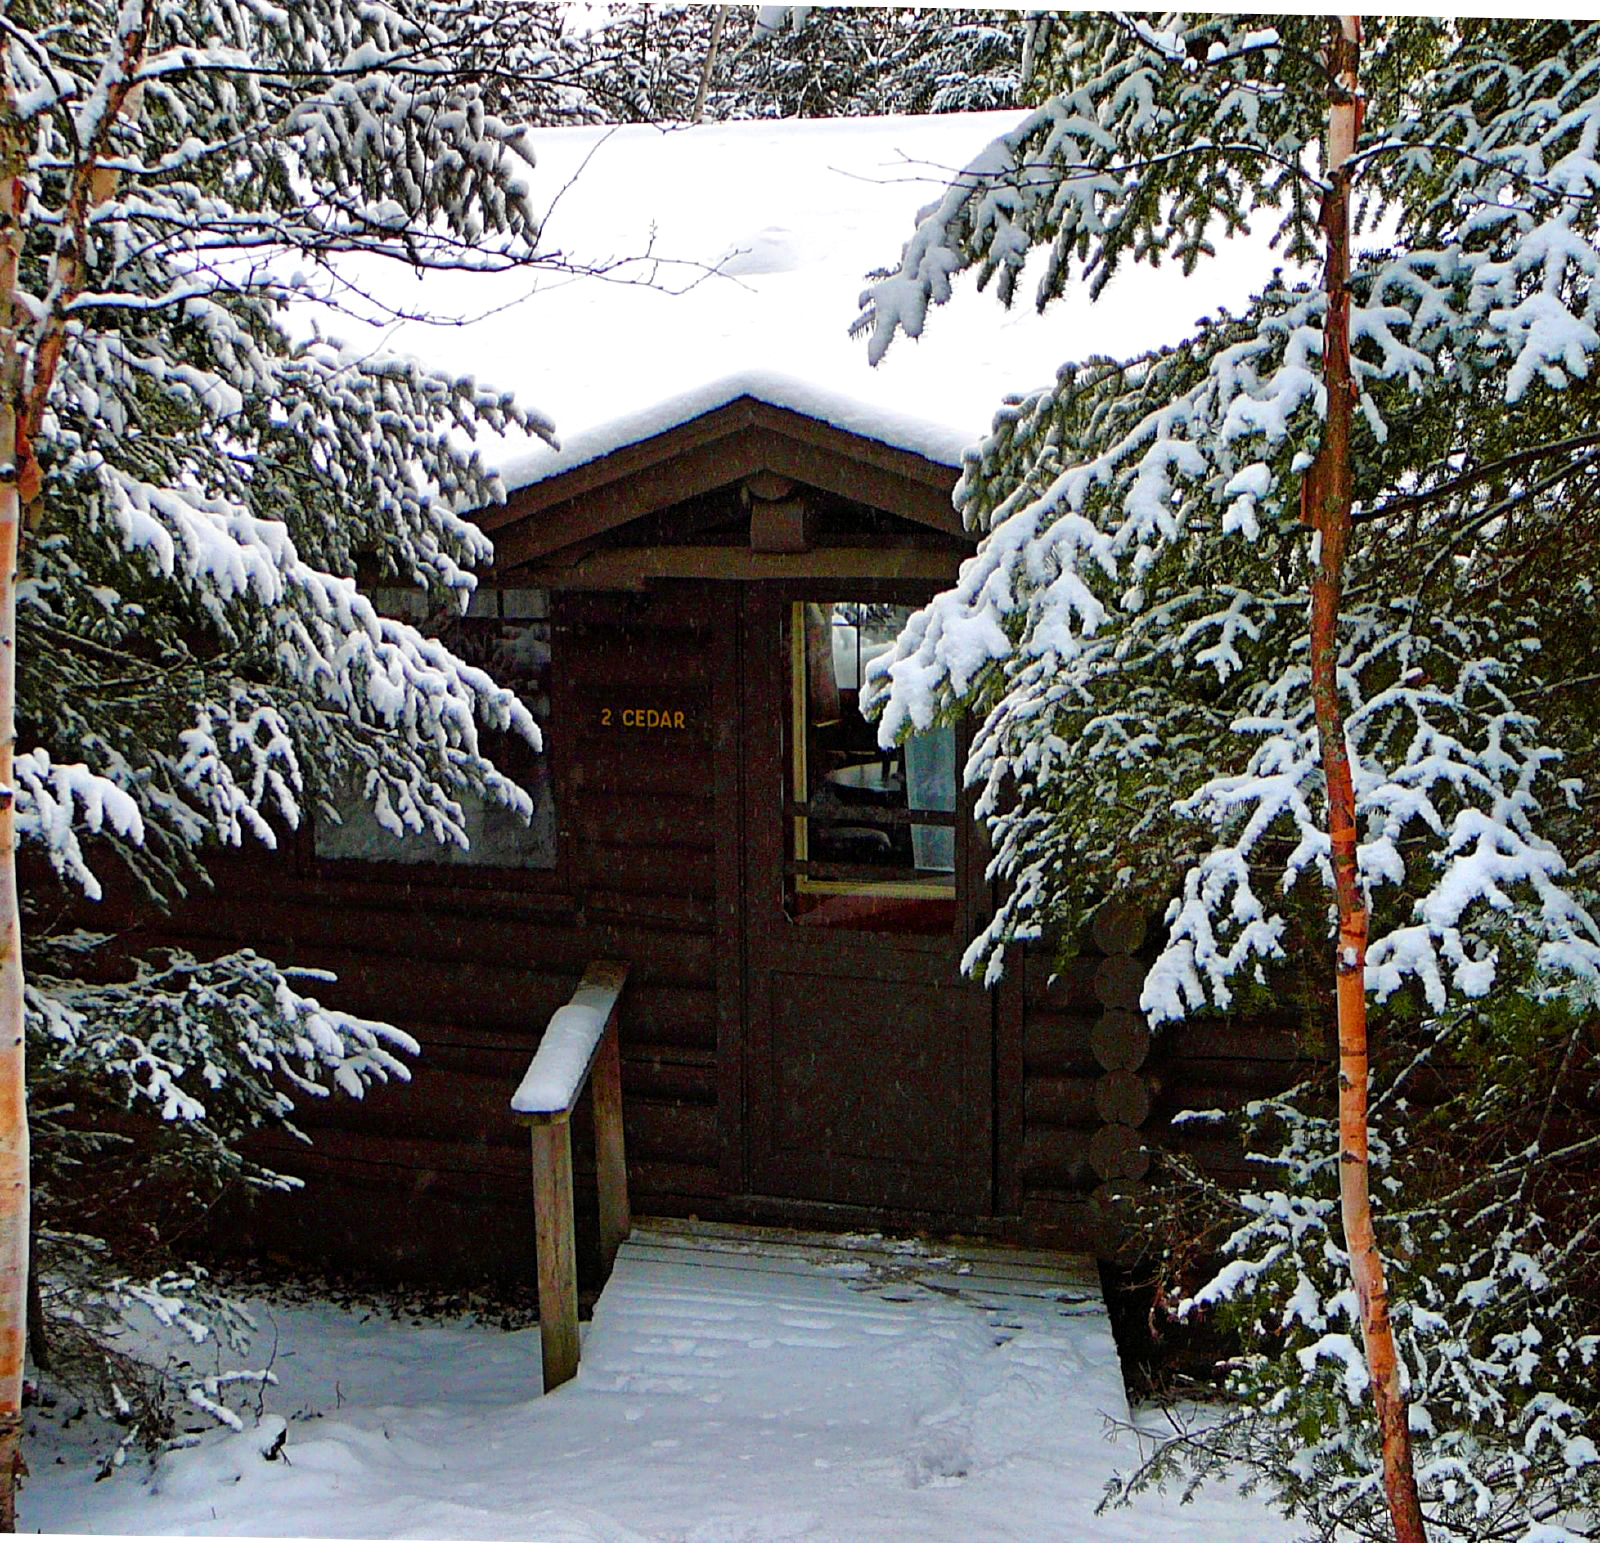 Log cabin in the winter surrounded by pine trees